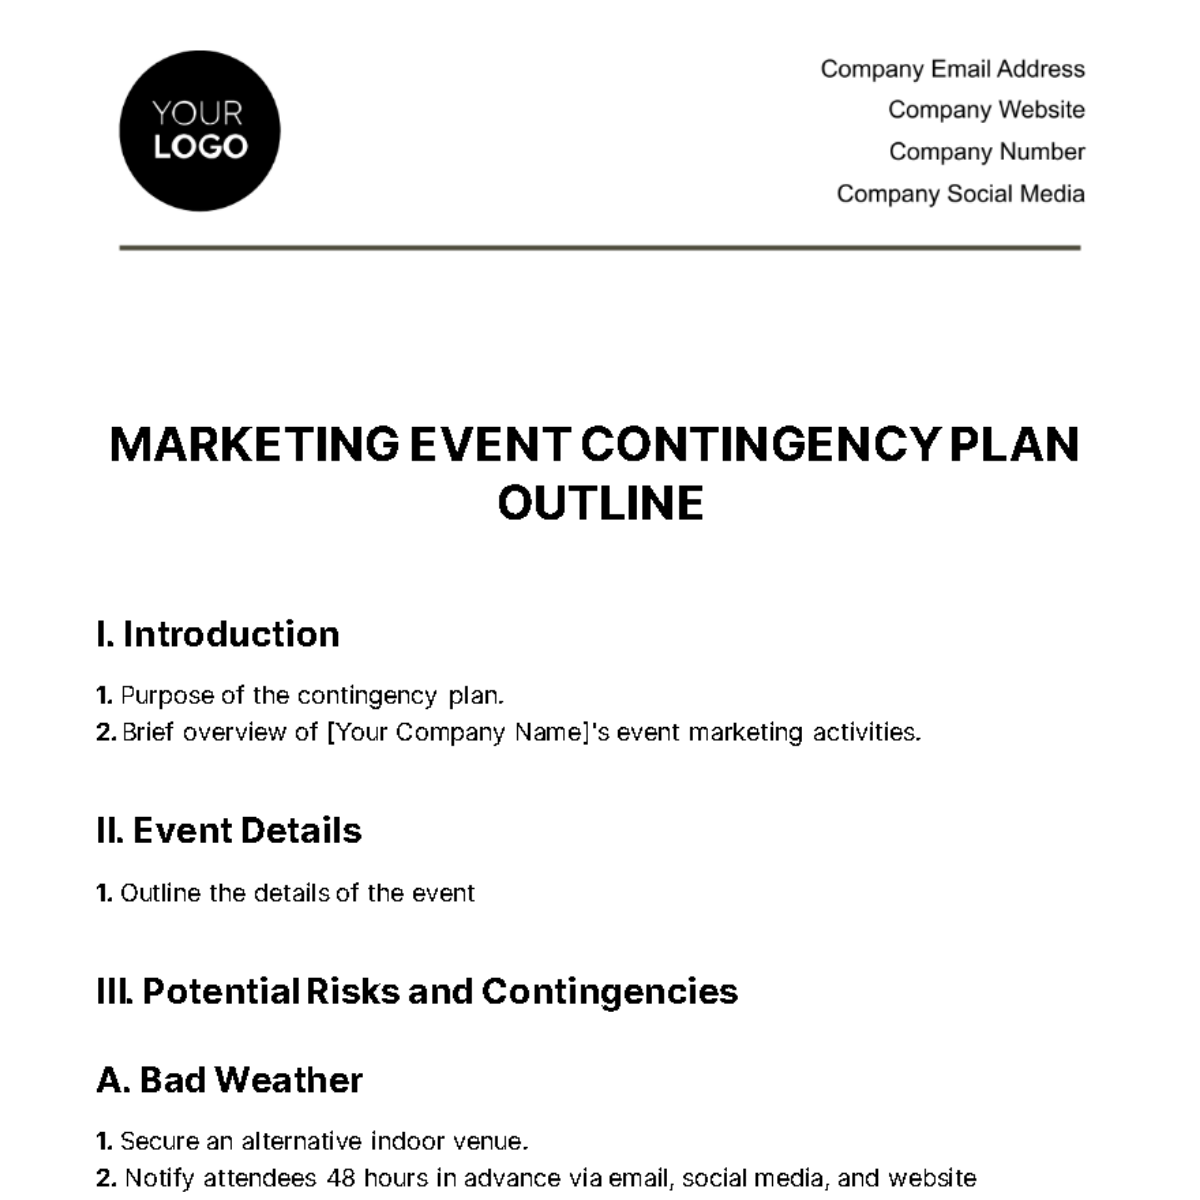 Marketing Event Contingency Plan Outline Template